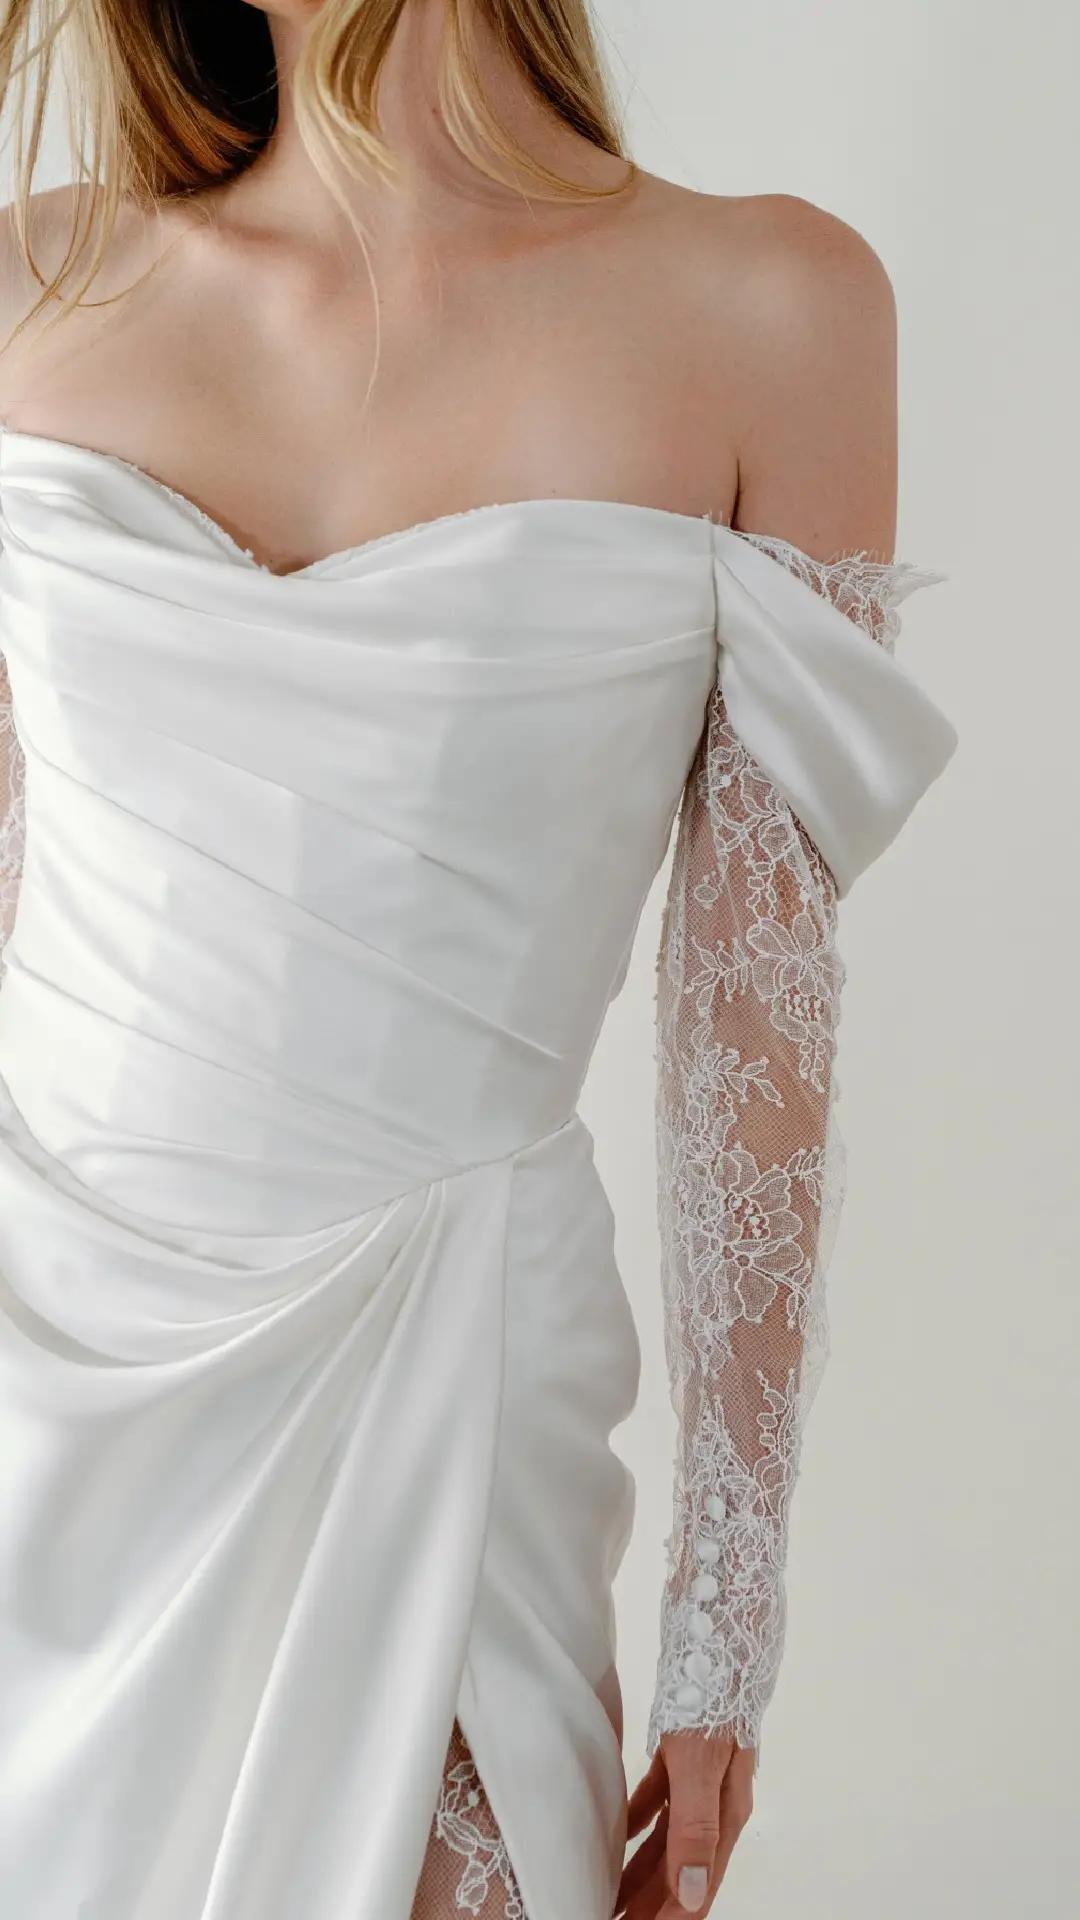 What Type of Bridal Appointment Should I Do? Image